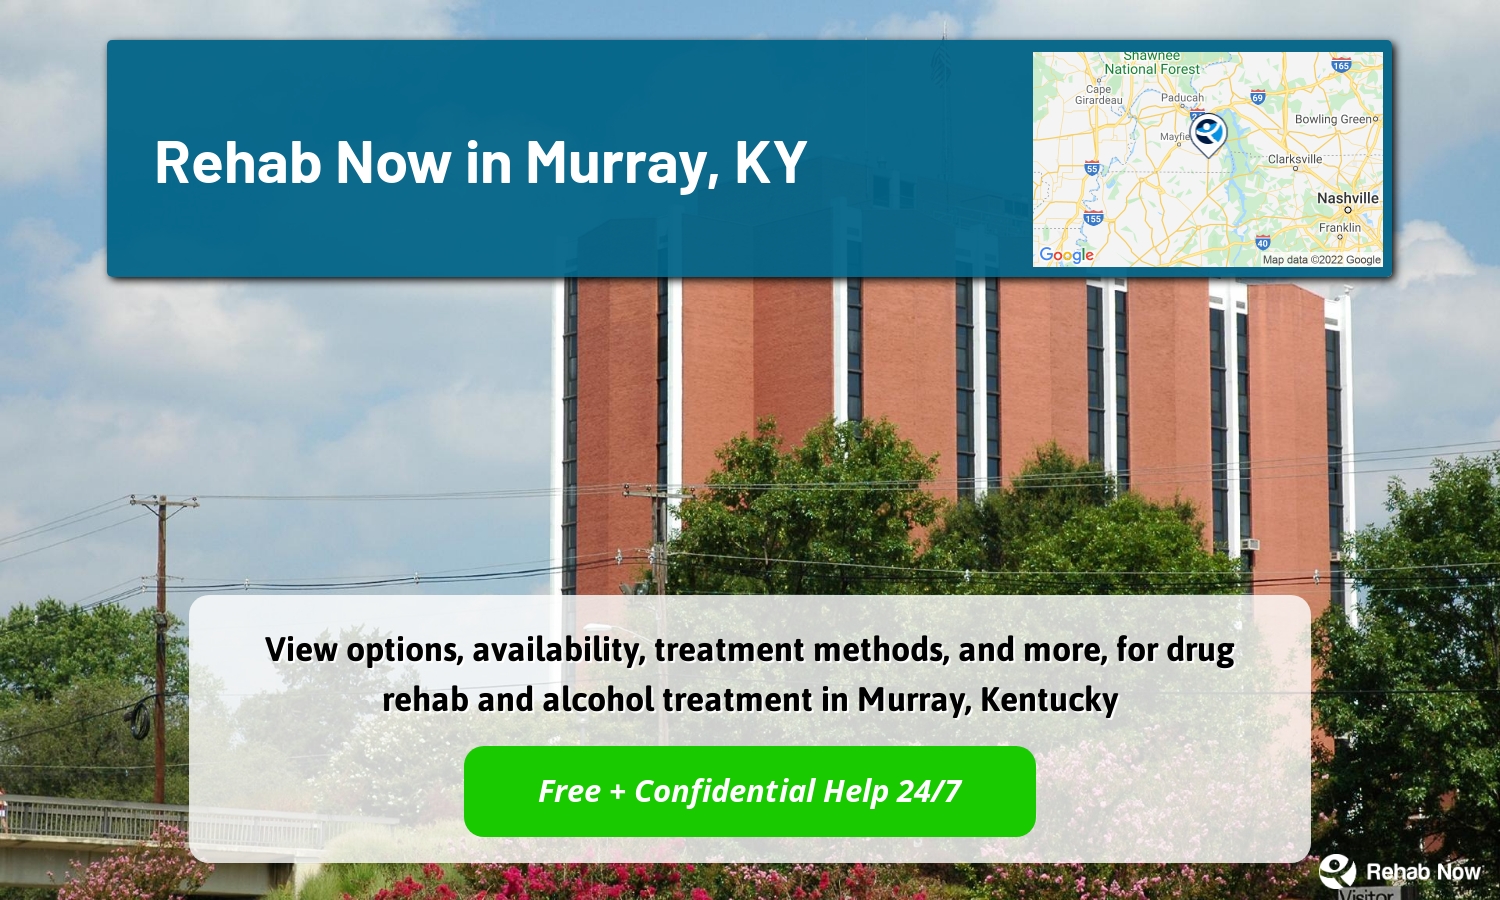 View options, availability, treatment methods, and more, for drug rehab and alcohol treatment in Murray, Kentucky